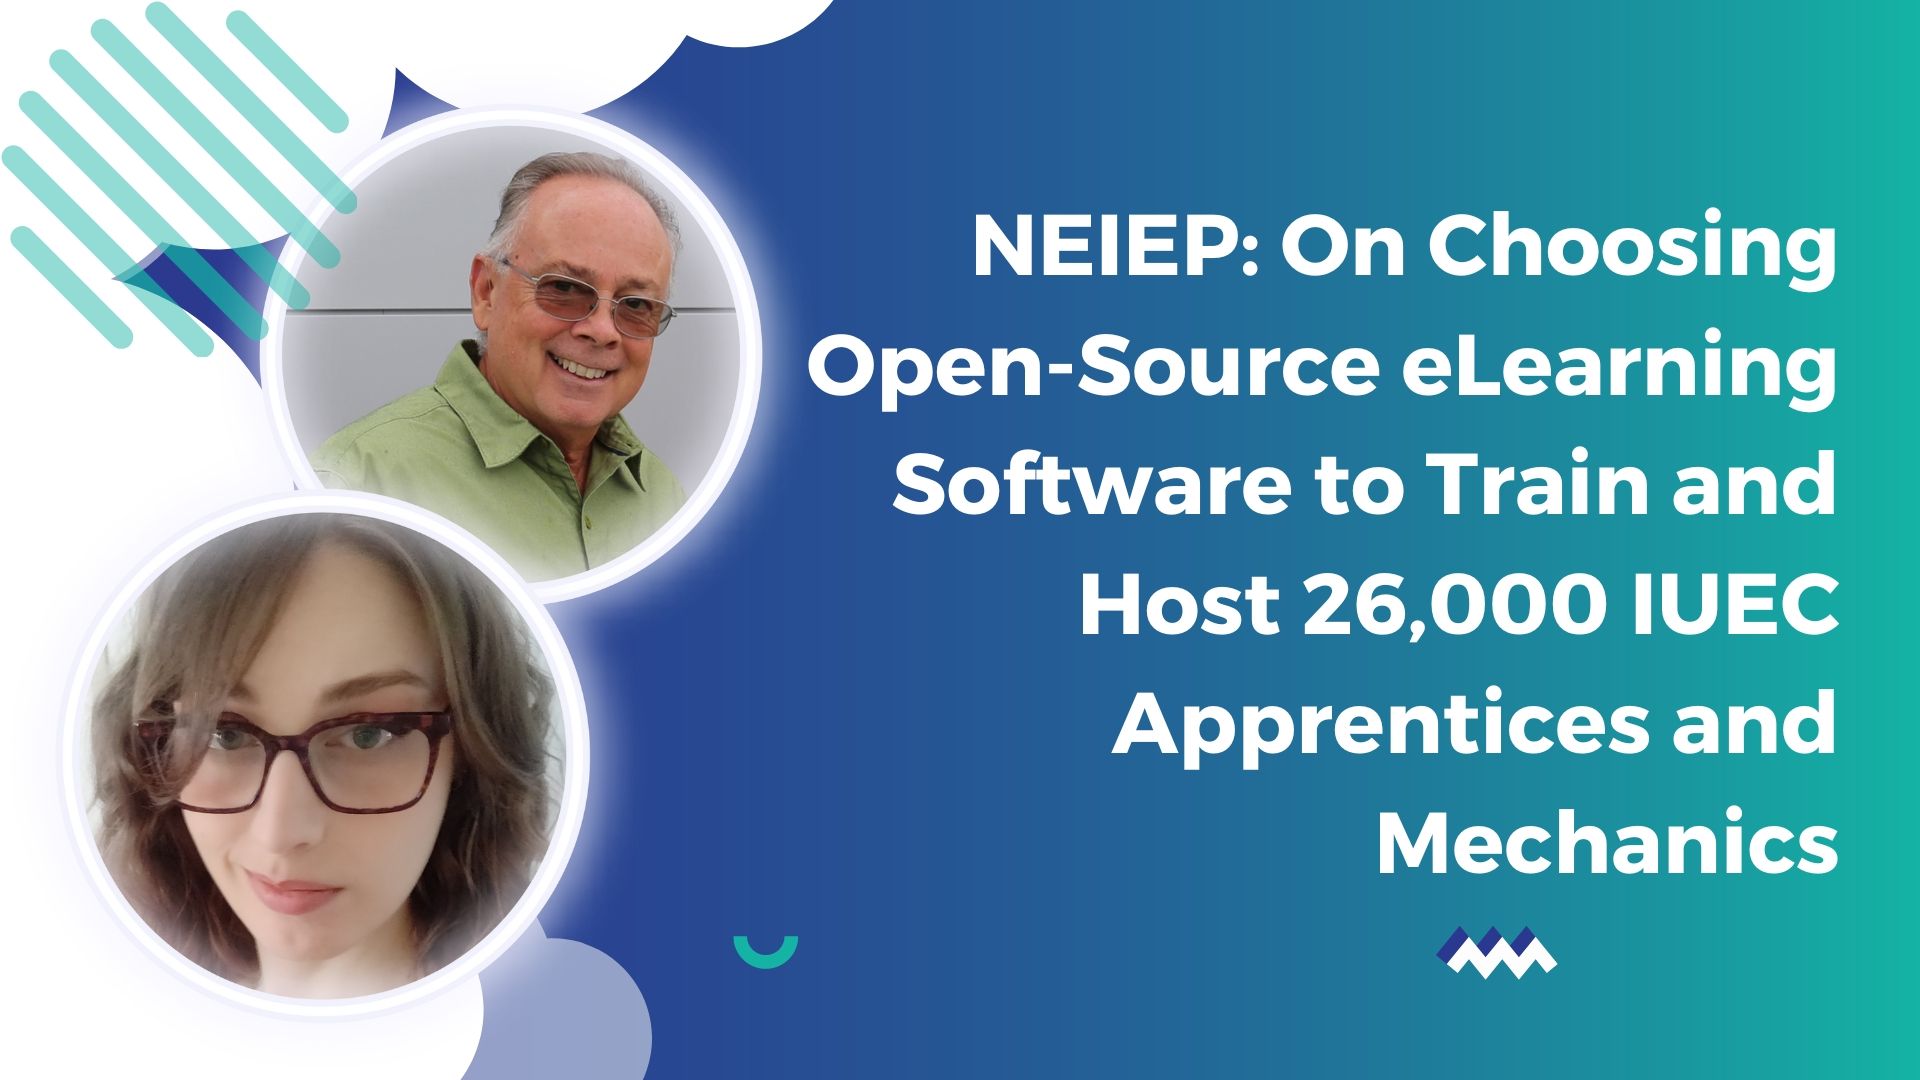 NEIEP: On Choosing Open-Source eLearning Software to Train and Host 26,000IUEC Apprentices and Mechanics